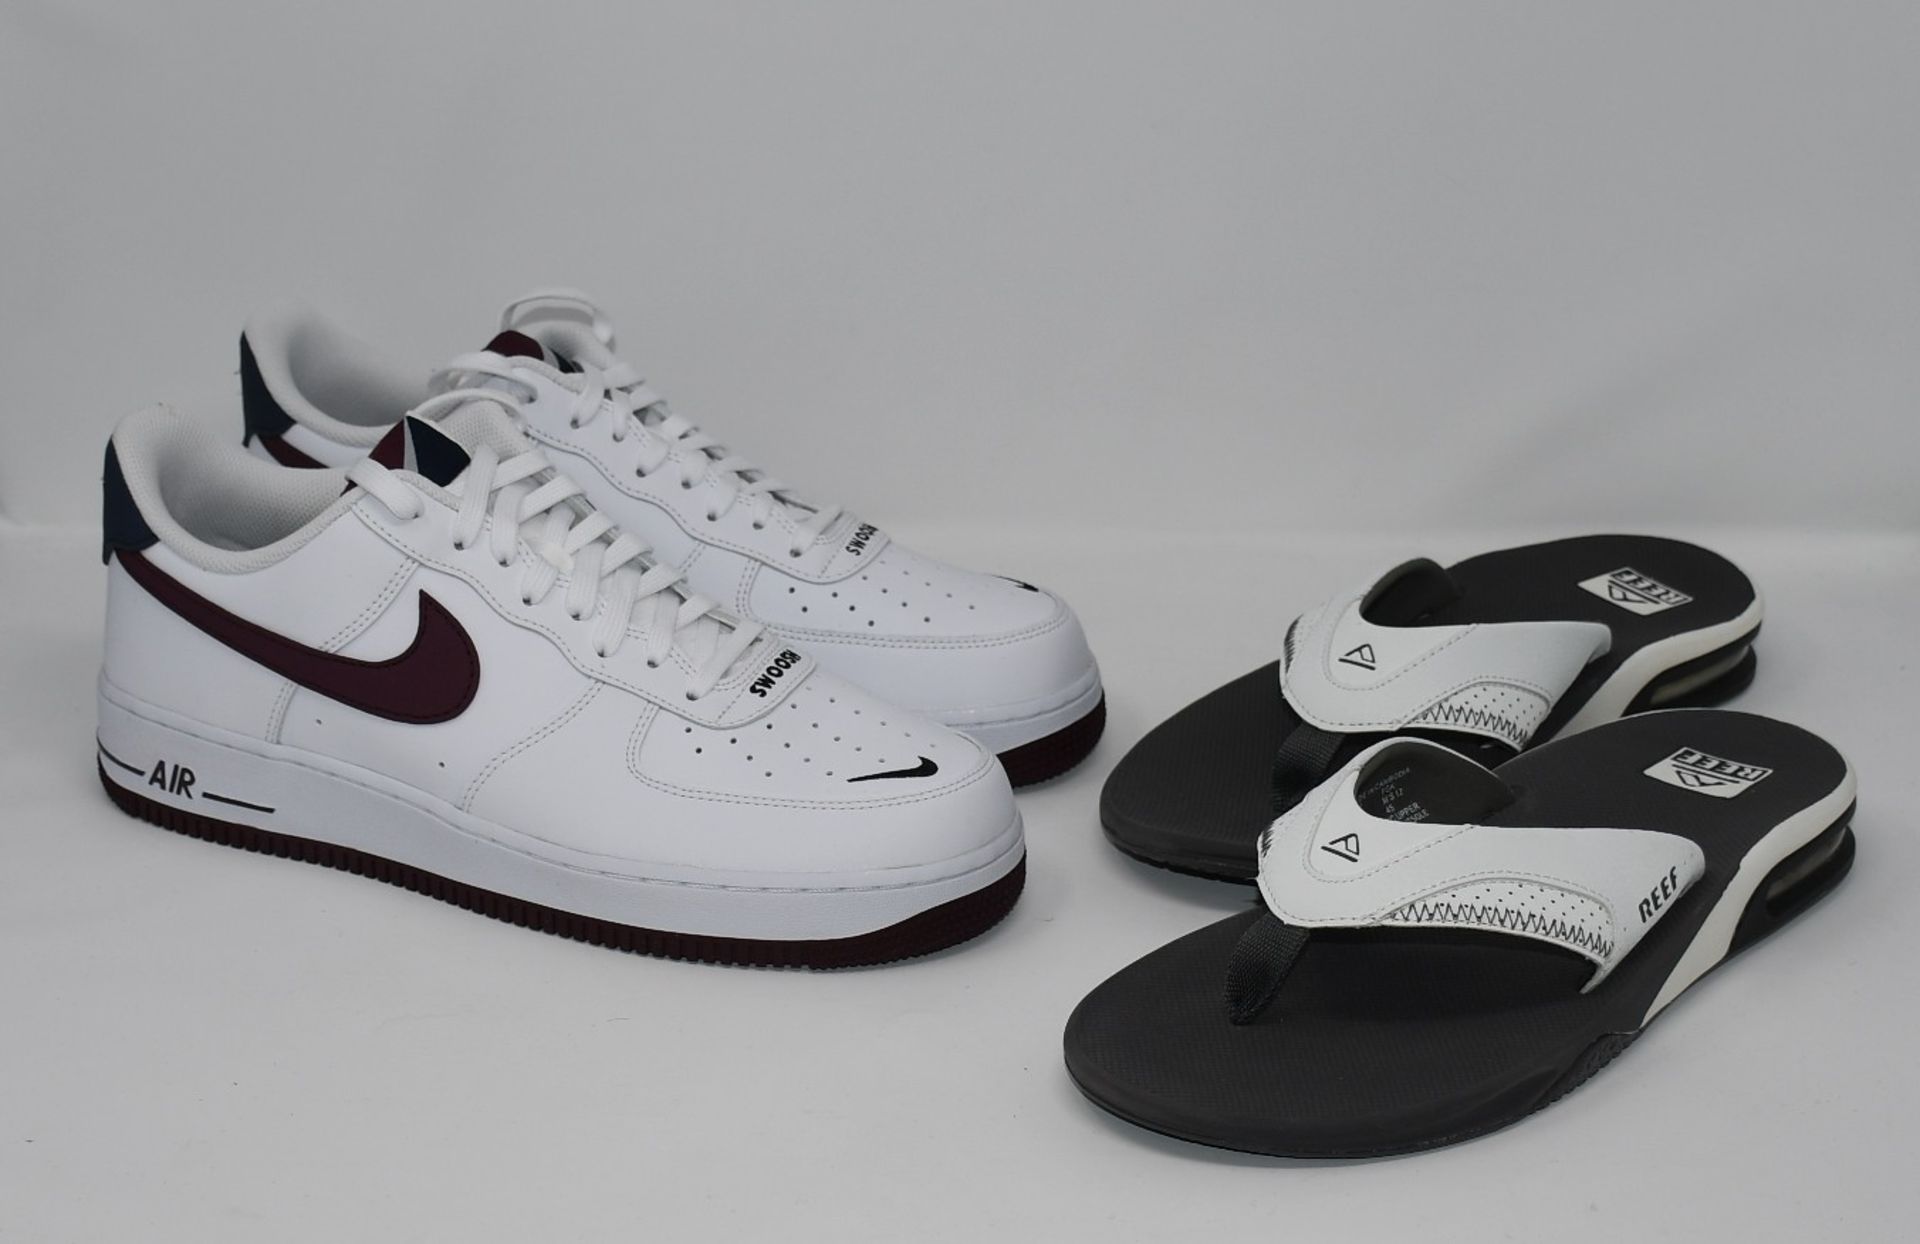 One as new Nike Air Force 1 '07 Lv8 4 size UJ 10 (CJ8731-100). One as new Reef white & grey